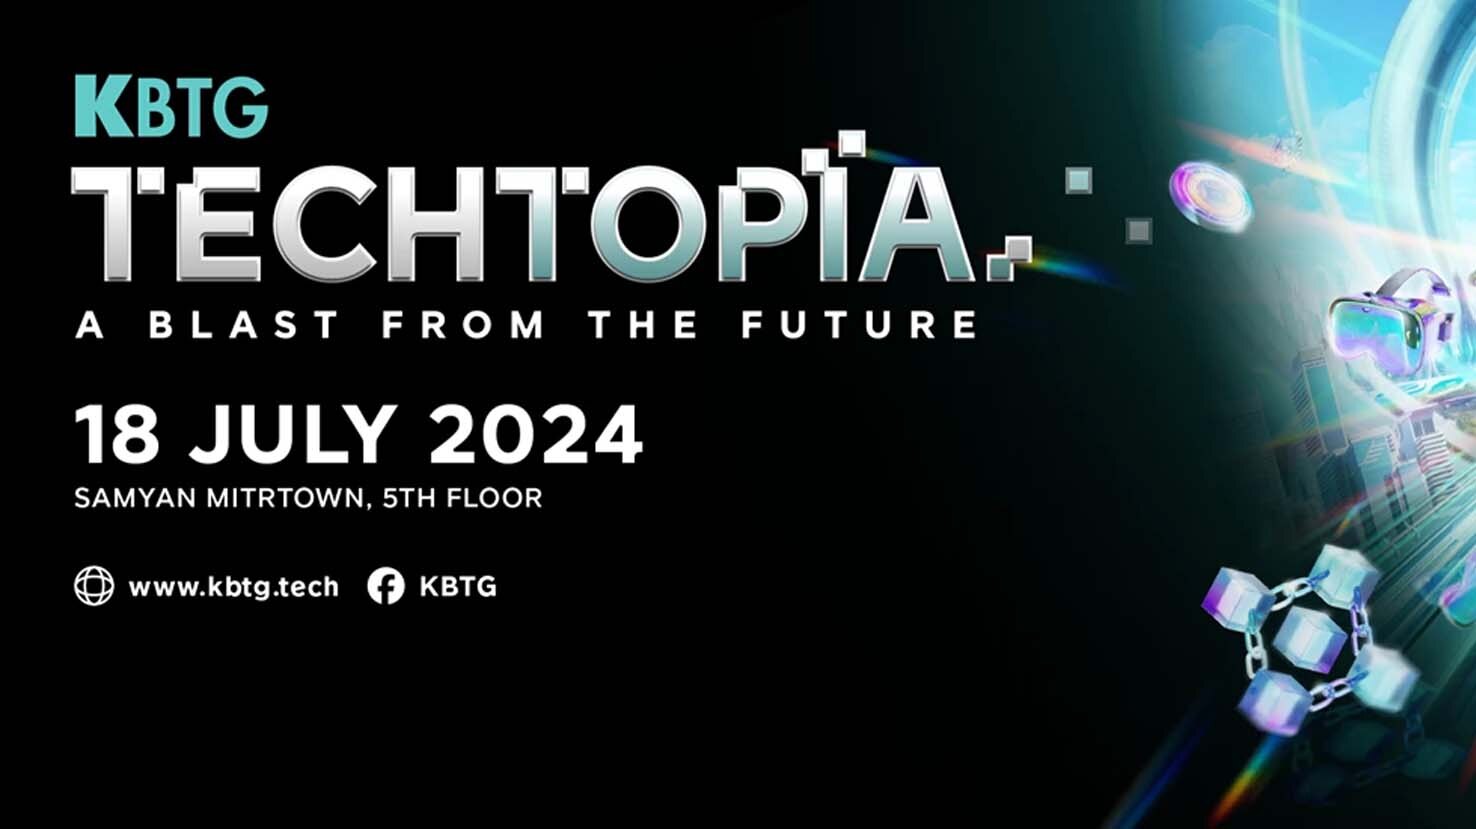 KBTG Techtopia - A blast from the future - Conference